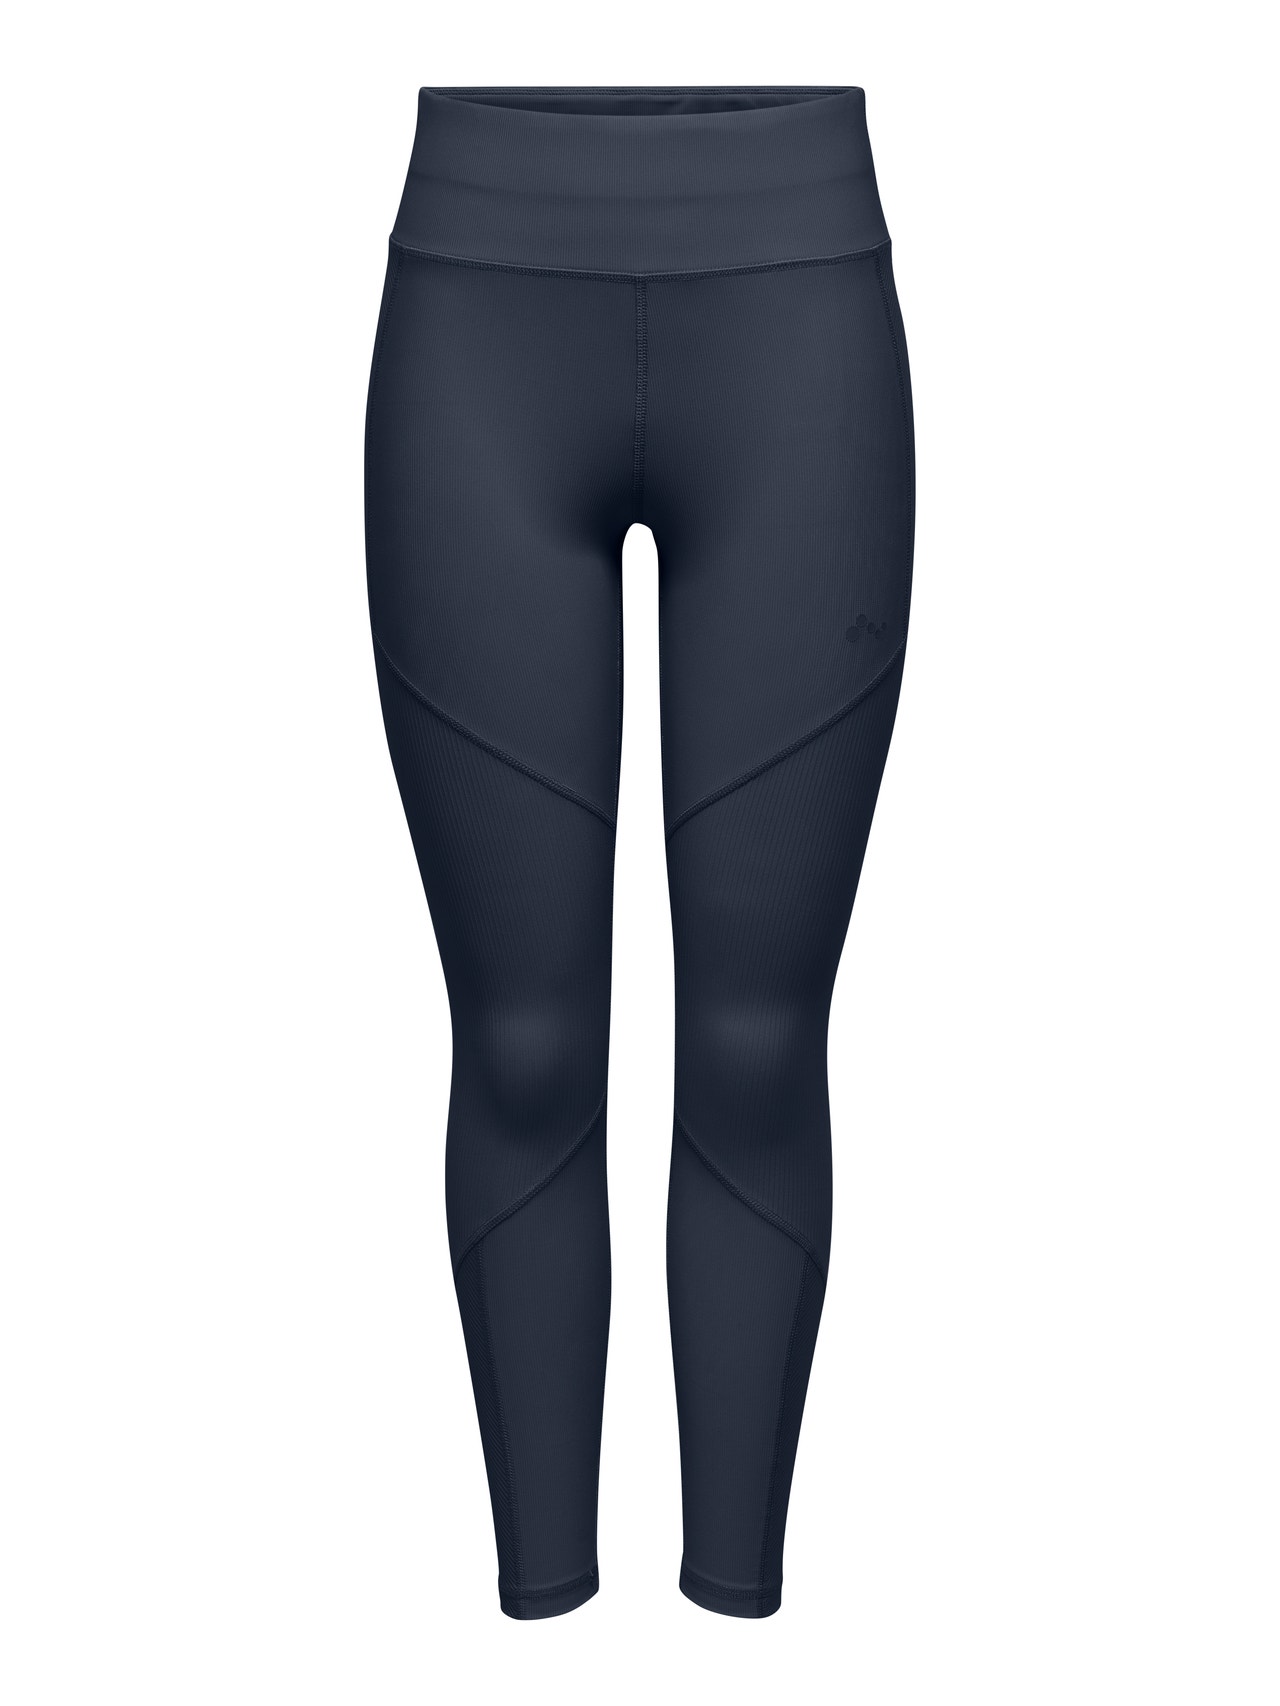 ONLY Tight fit High waist Legging -Blue Nights - 15207648